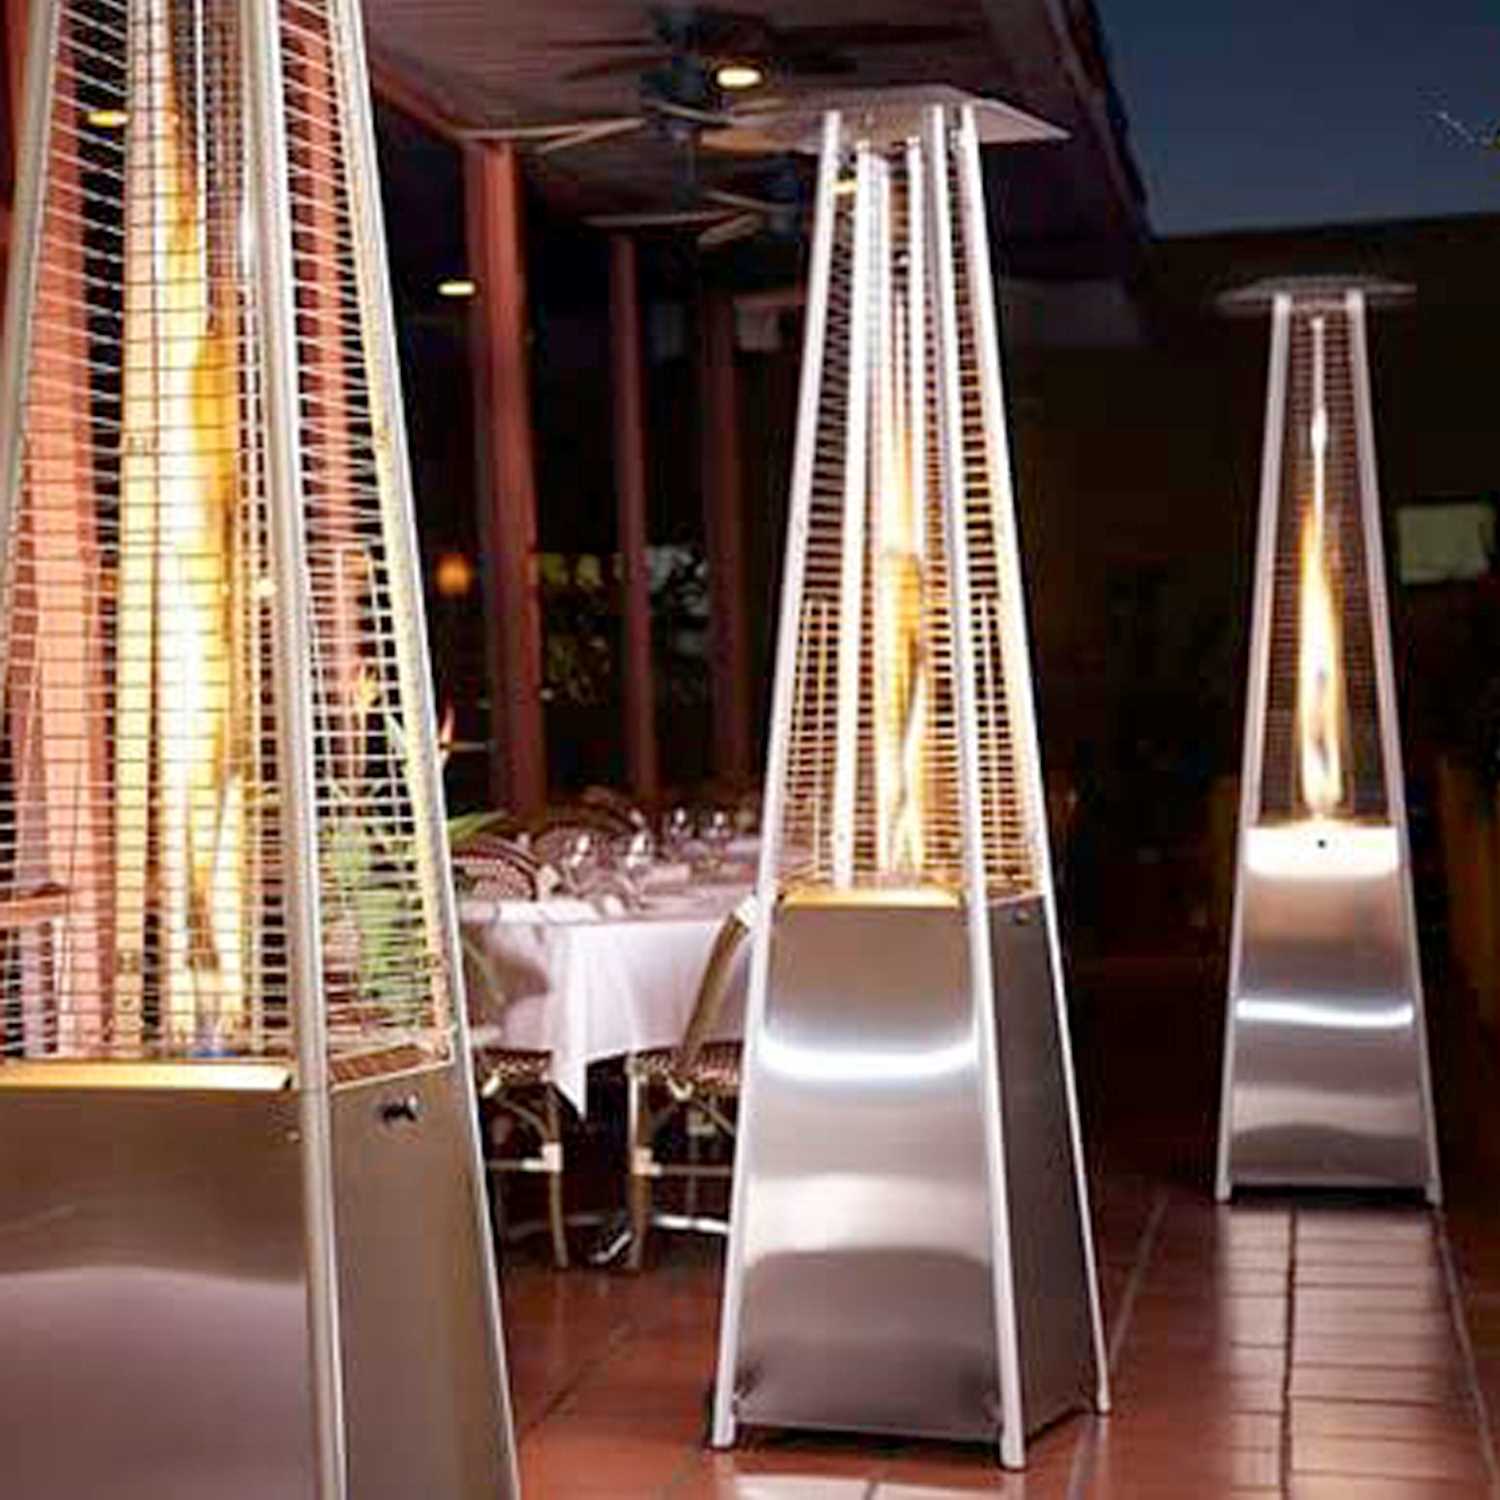 91-Inch Tall Dancing Flames Tower Patio Heater At Night – High End Christmas Gift For Husband